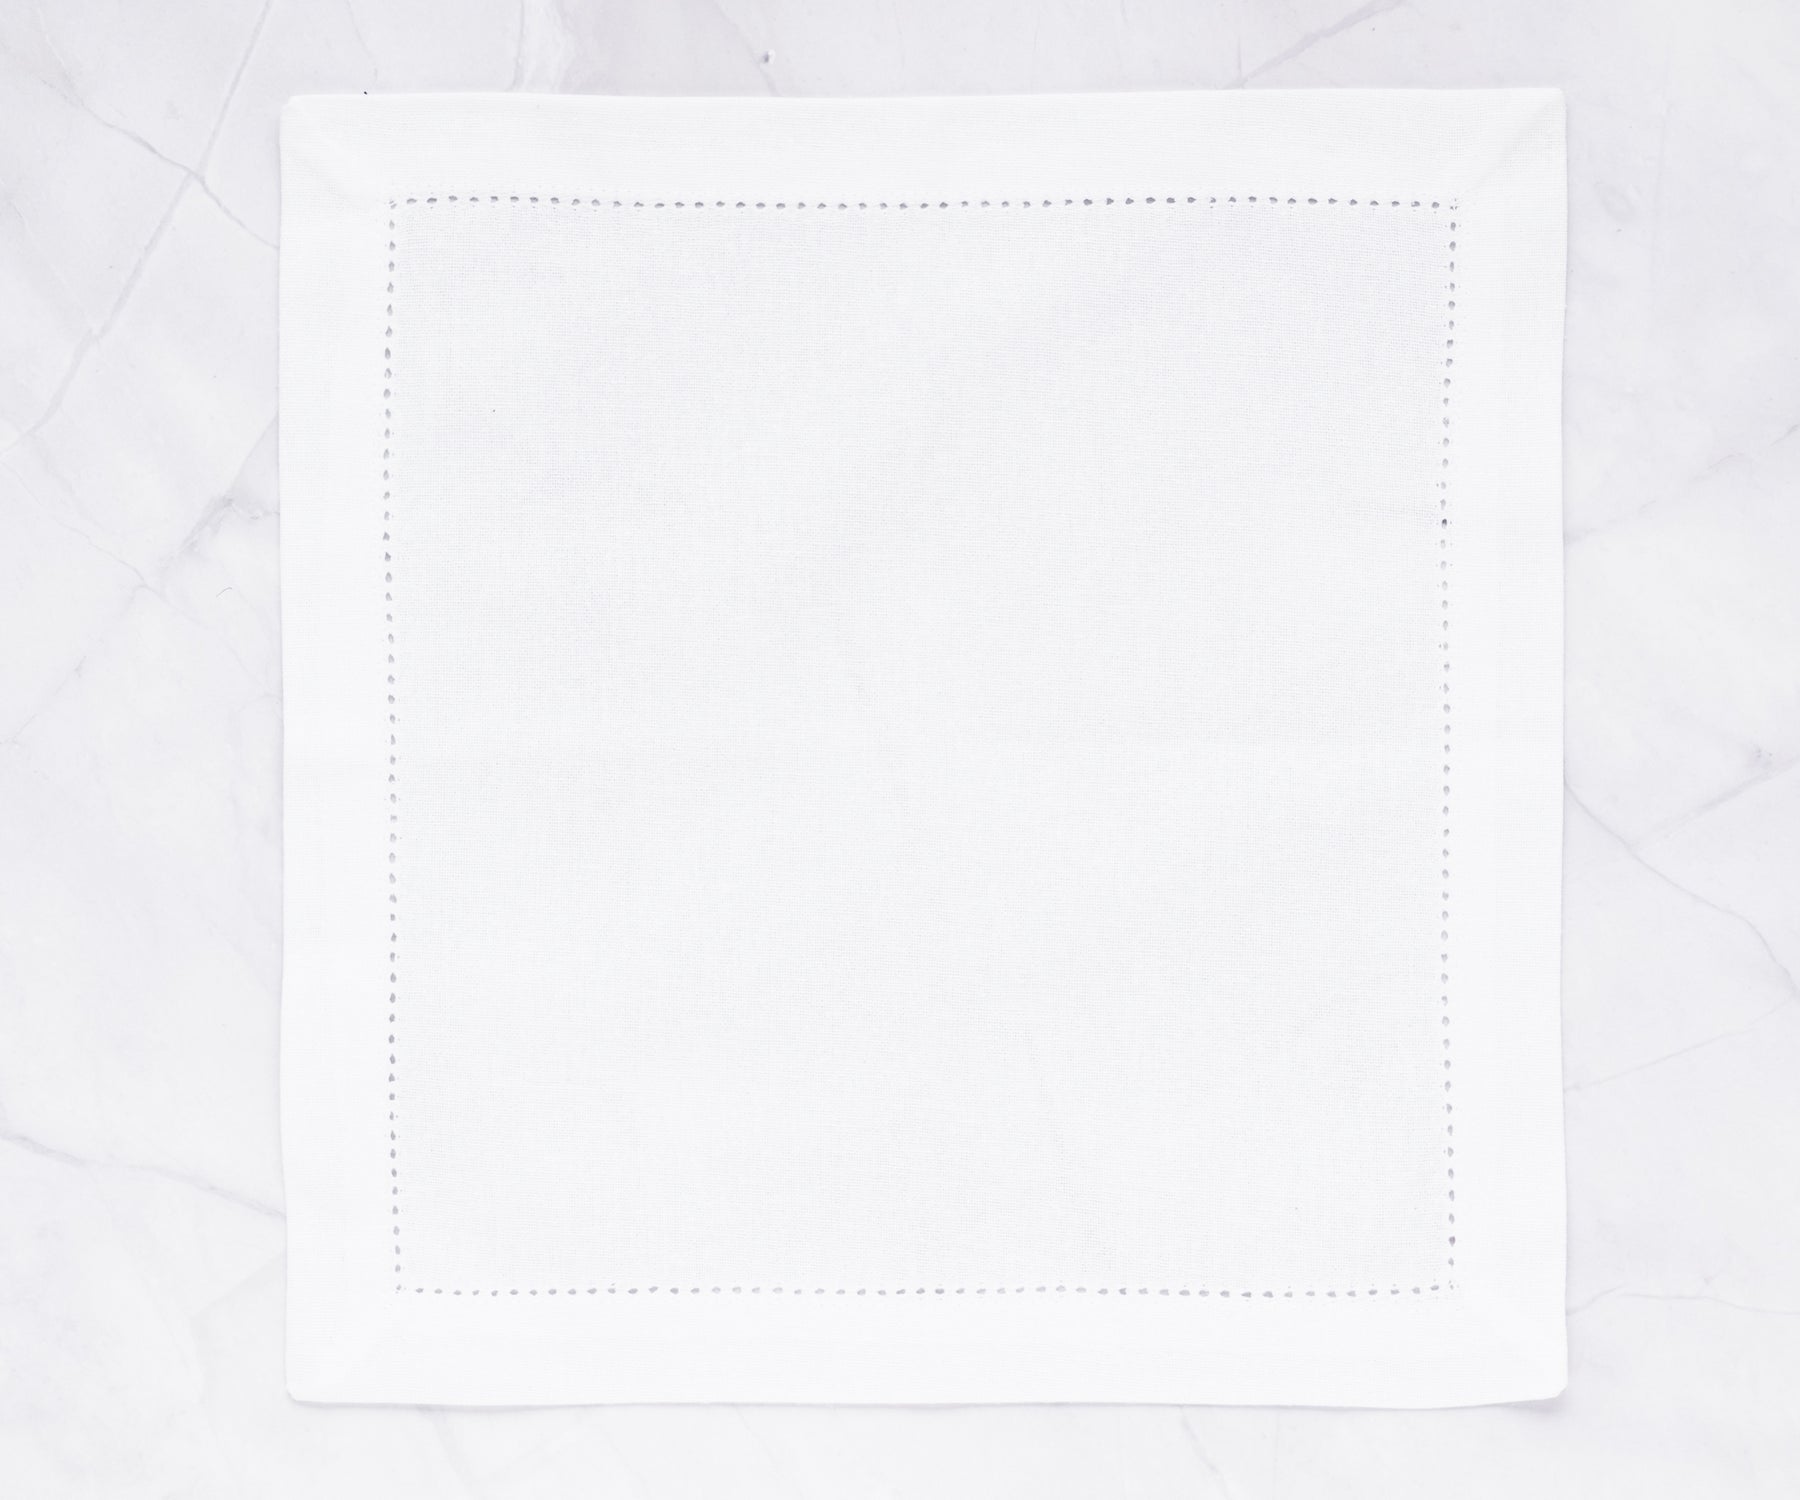 cloth napkins everyday use are a versatile and indispensable addition to any table setting, 